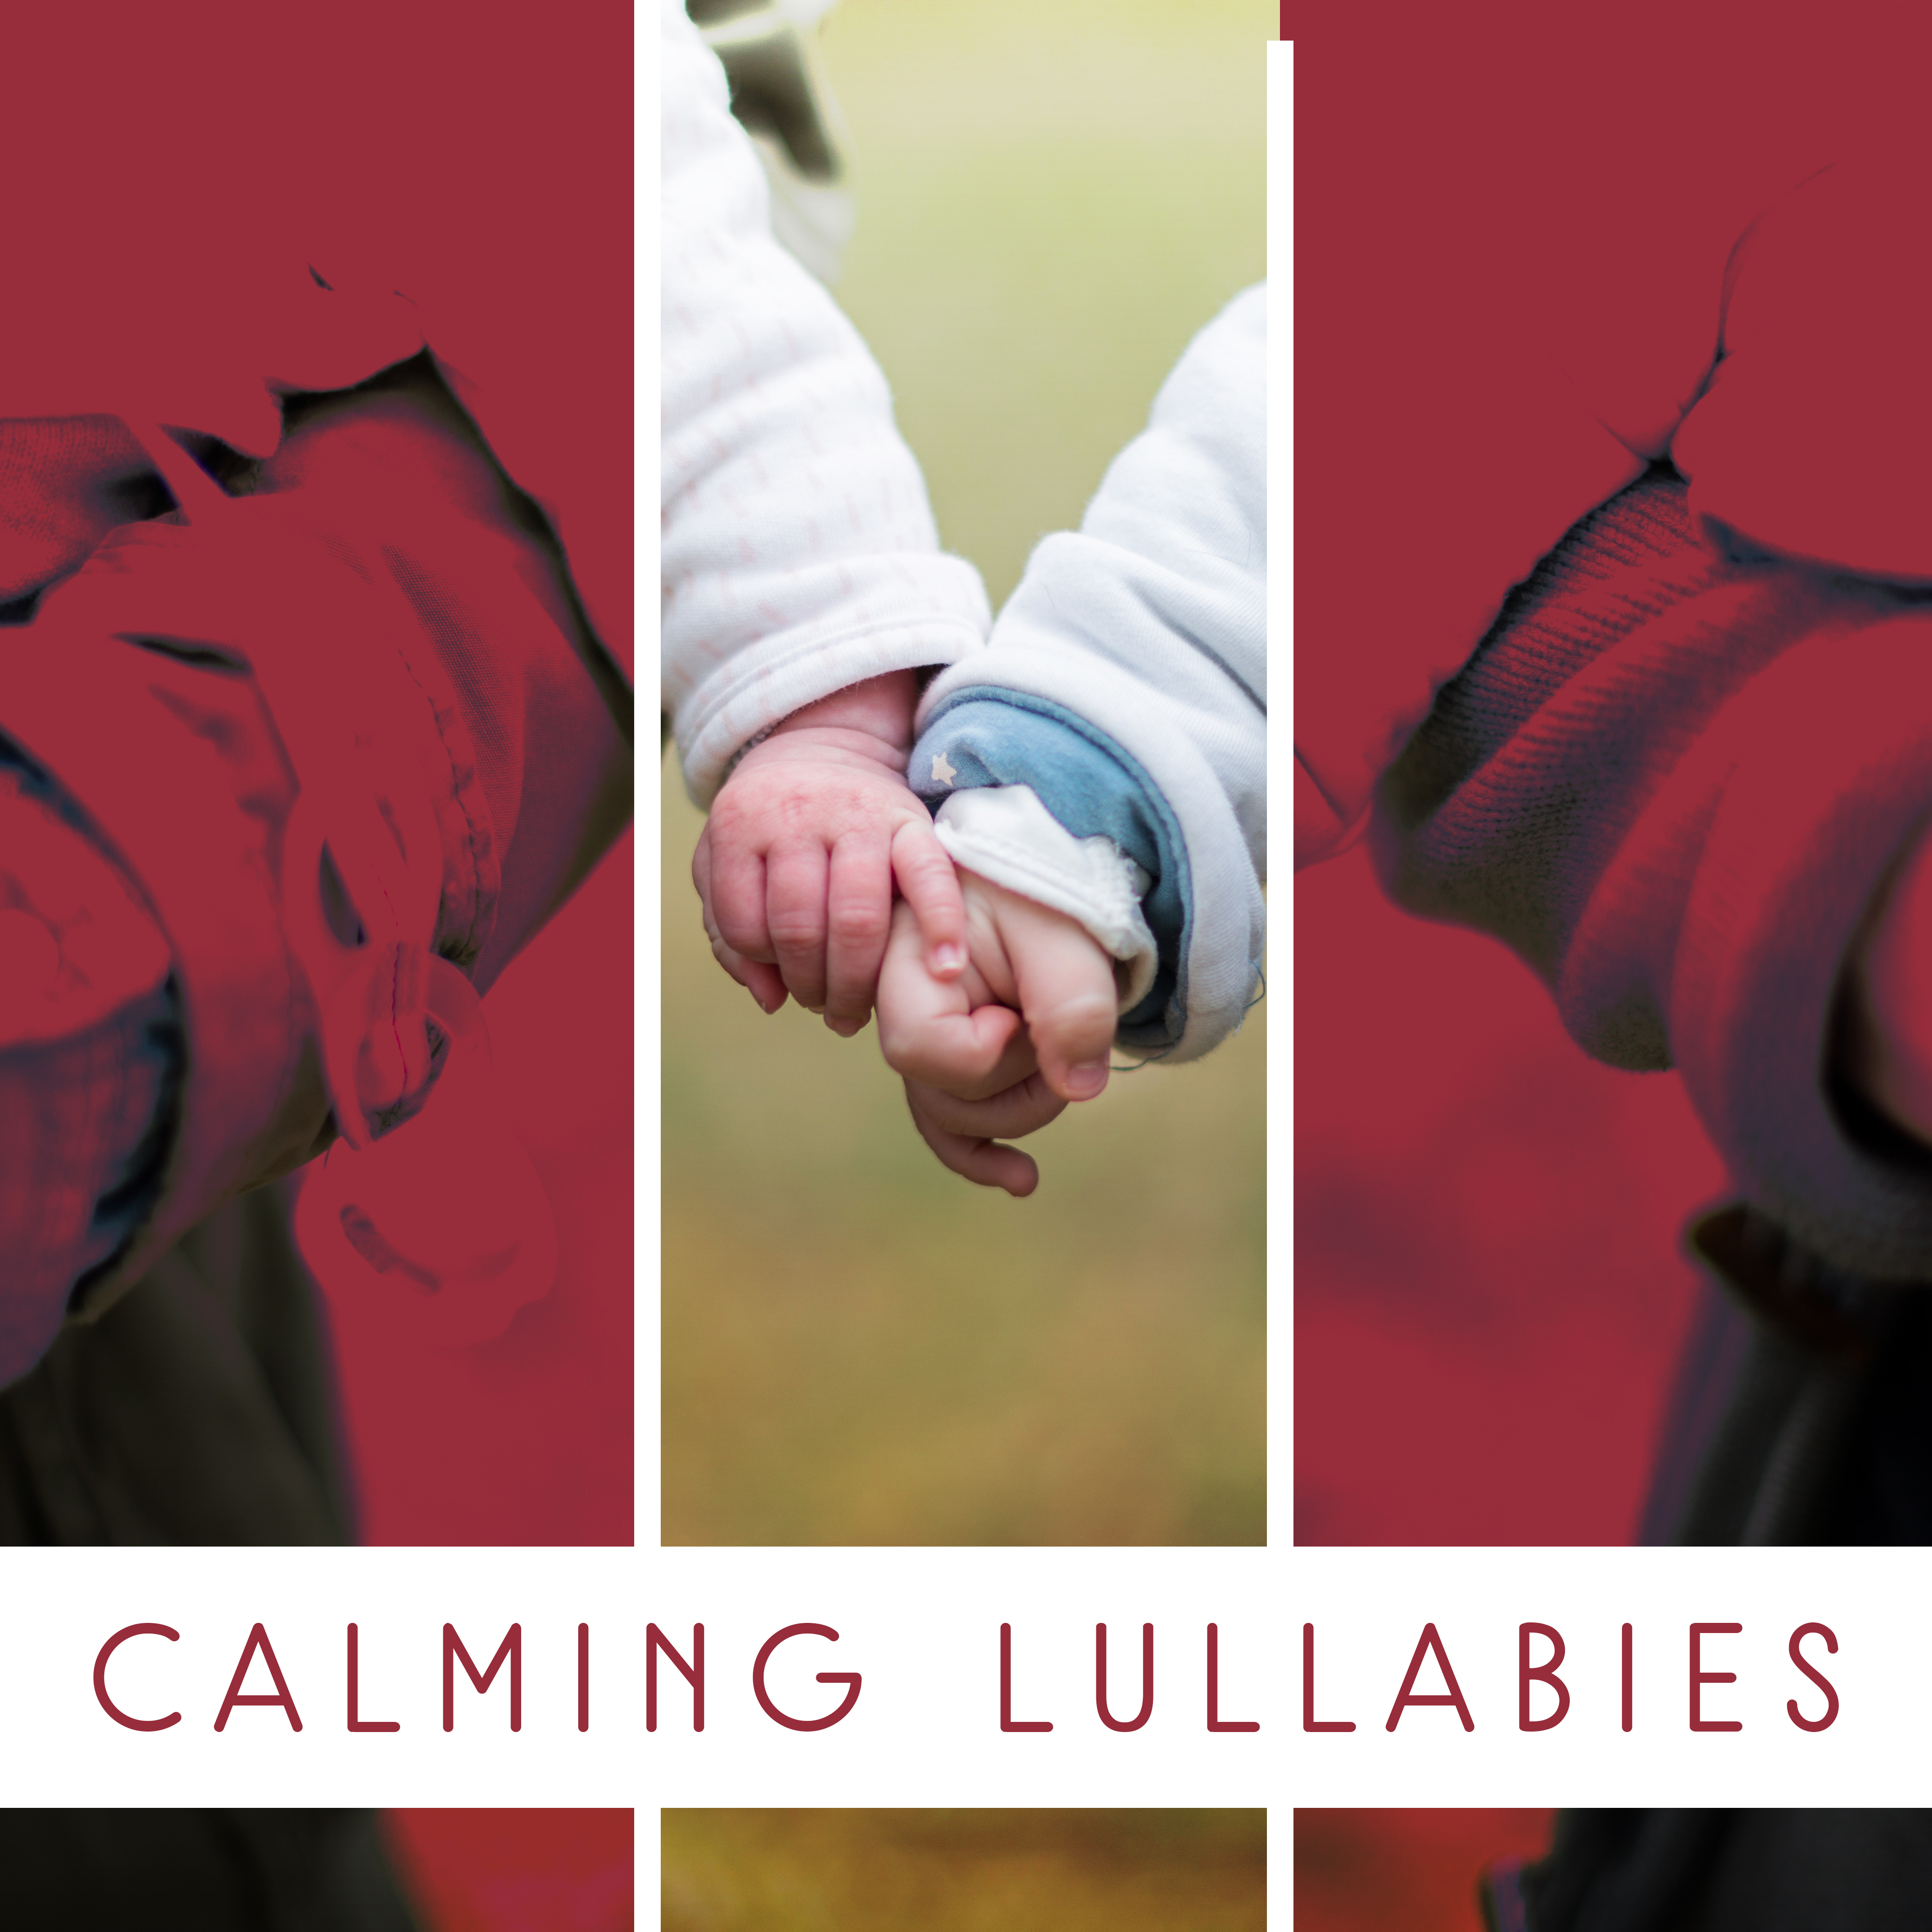 Calming Lullabies  Soft Music to Relax, No More Crying, Night Sounds for Baby, Peaceful Songs for Child Sleep